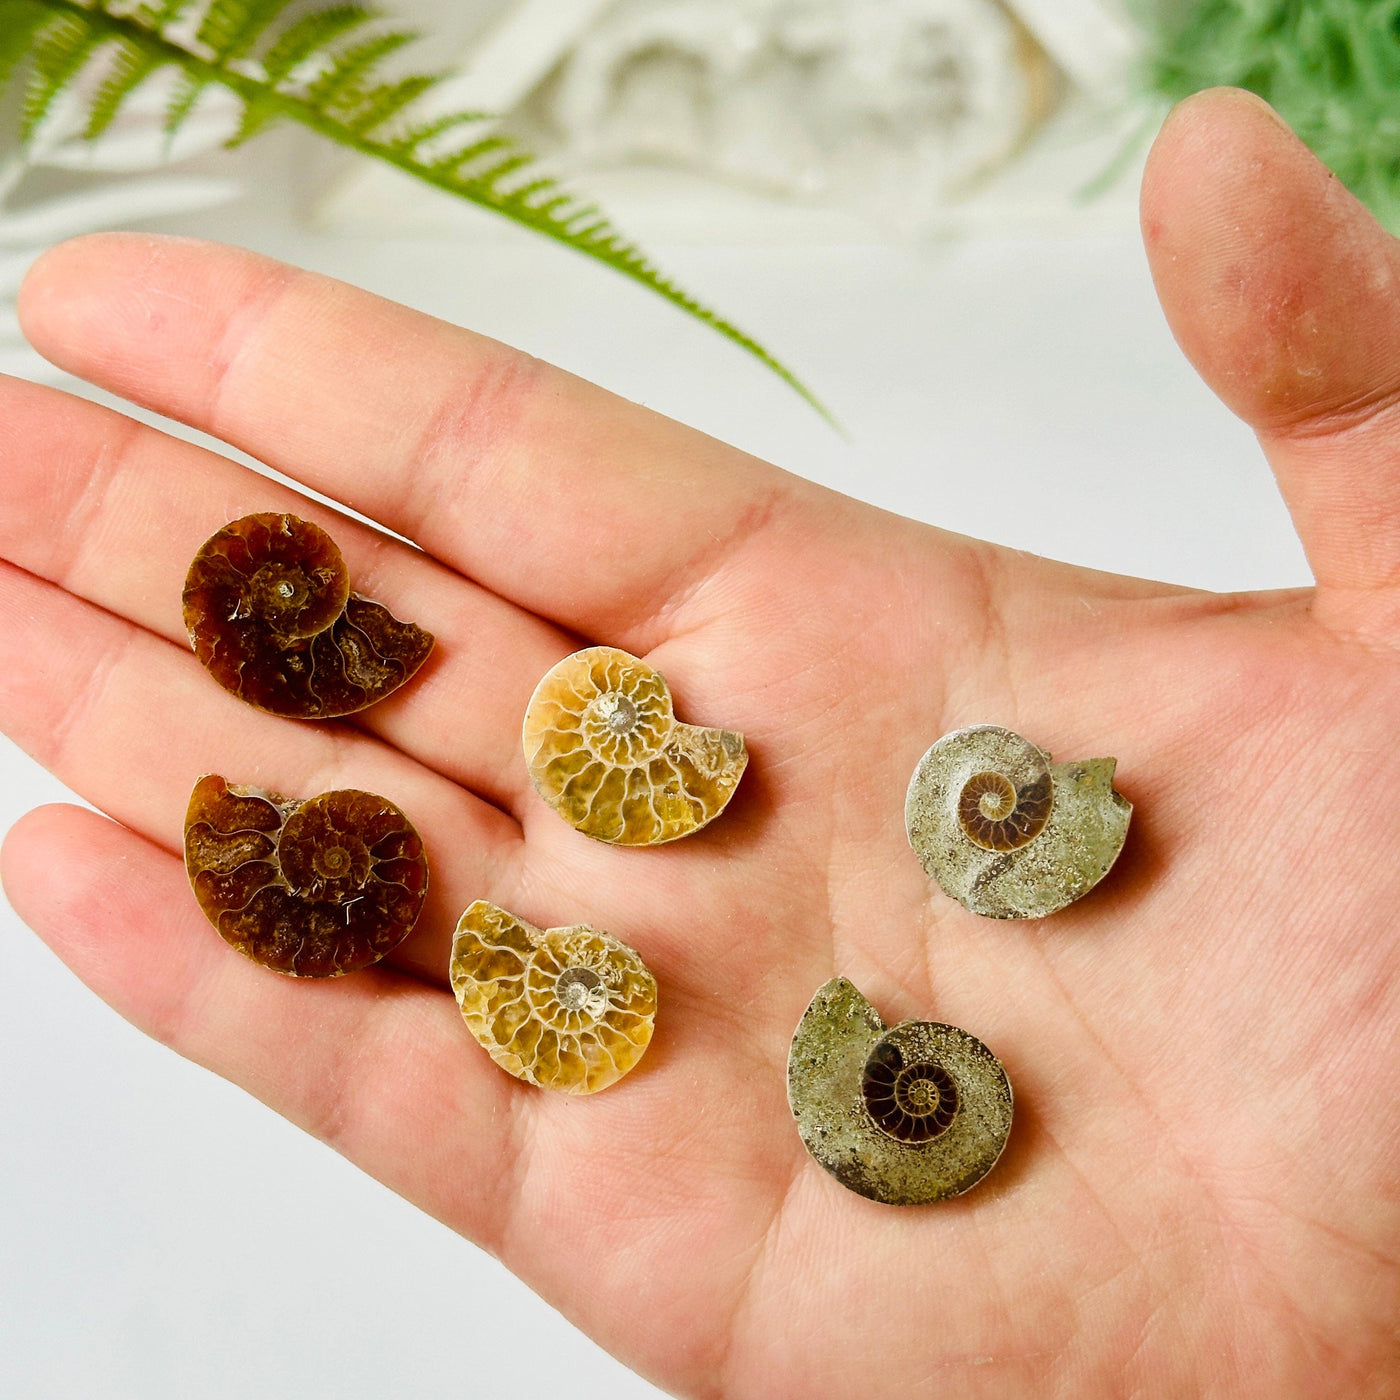 Ammonite Fossil Slices - Small Pairs - You Choose all pairs in hand for size reference